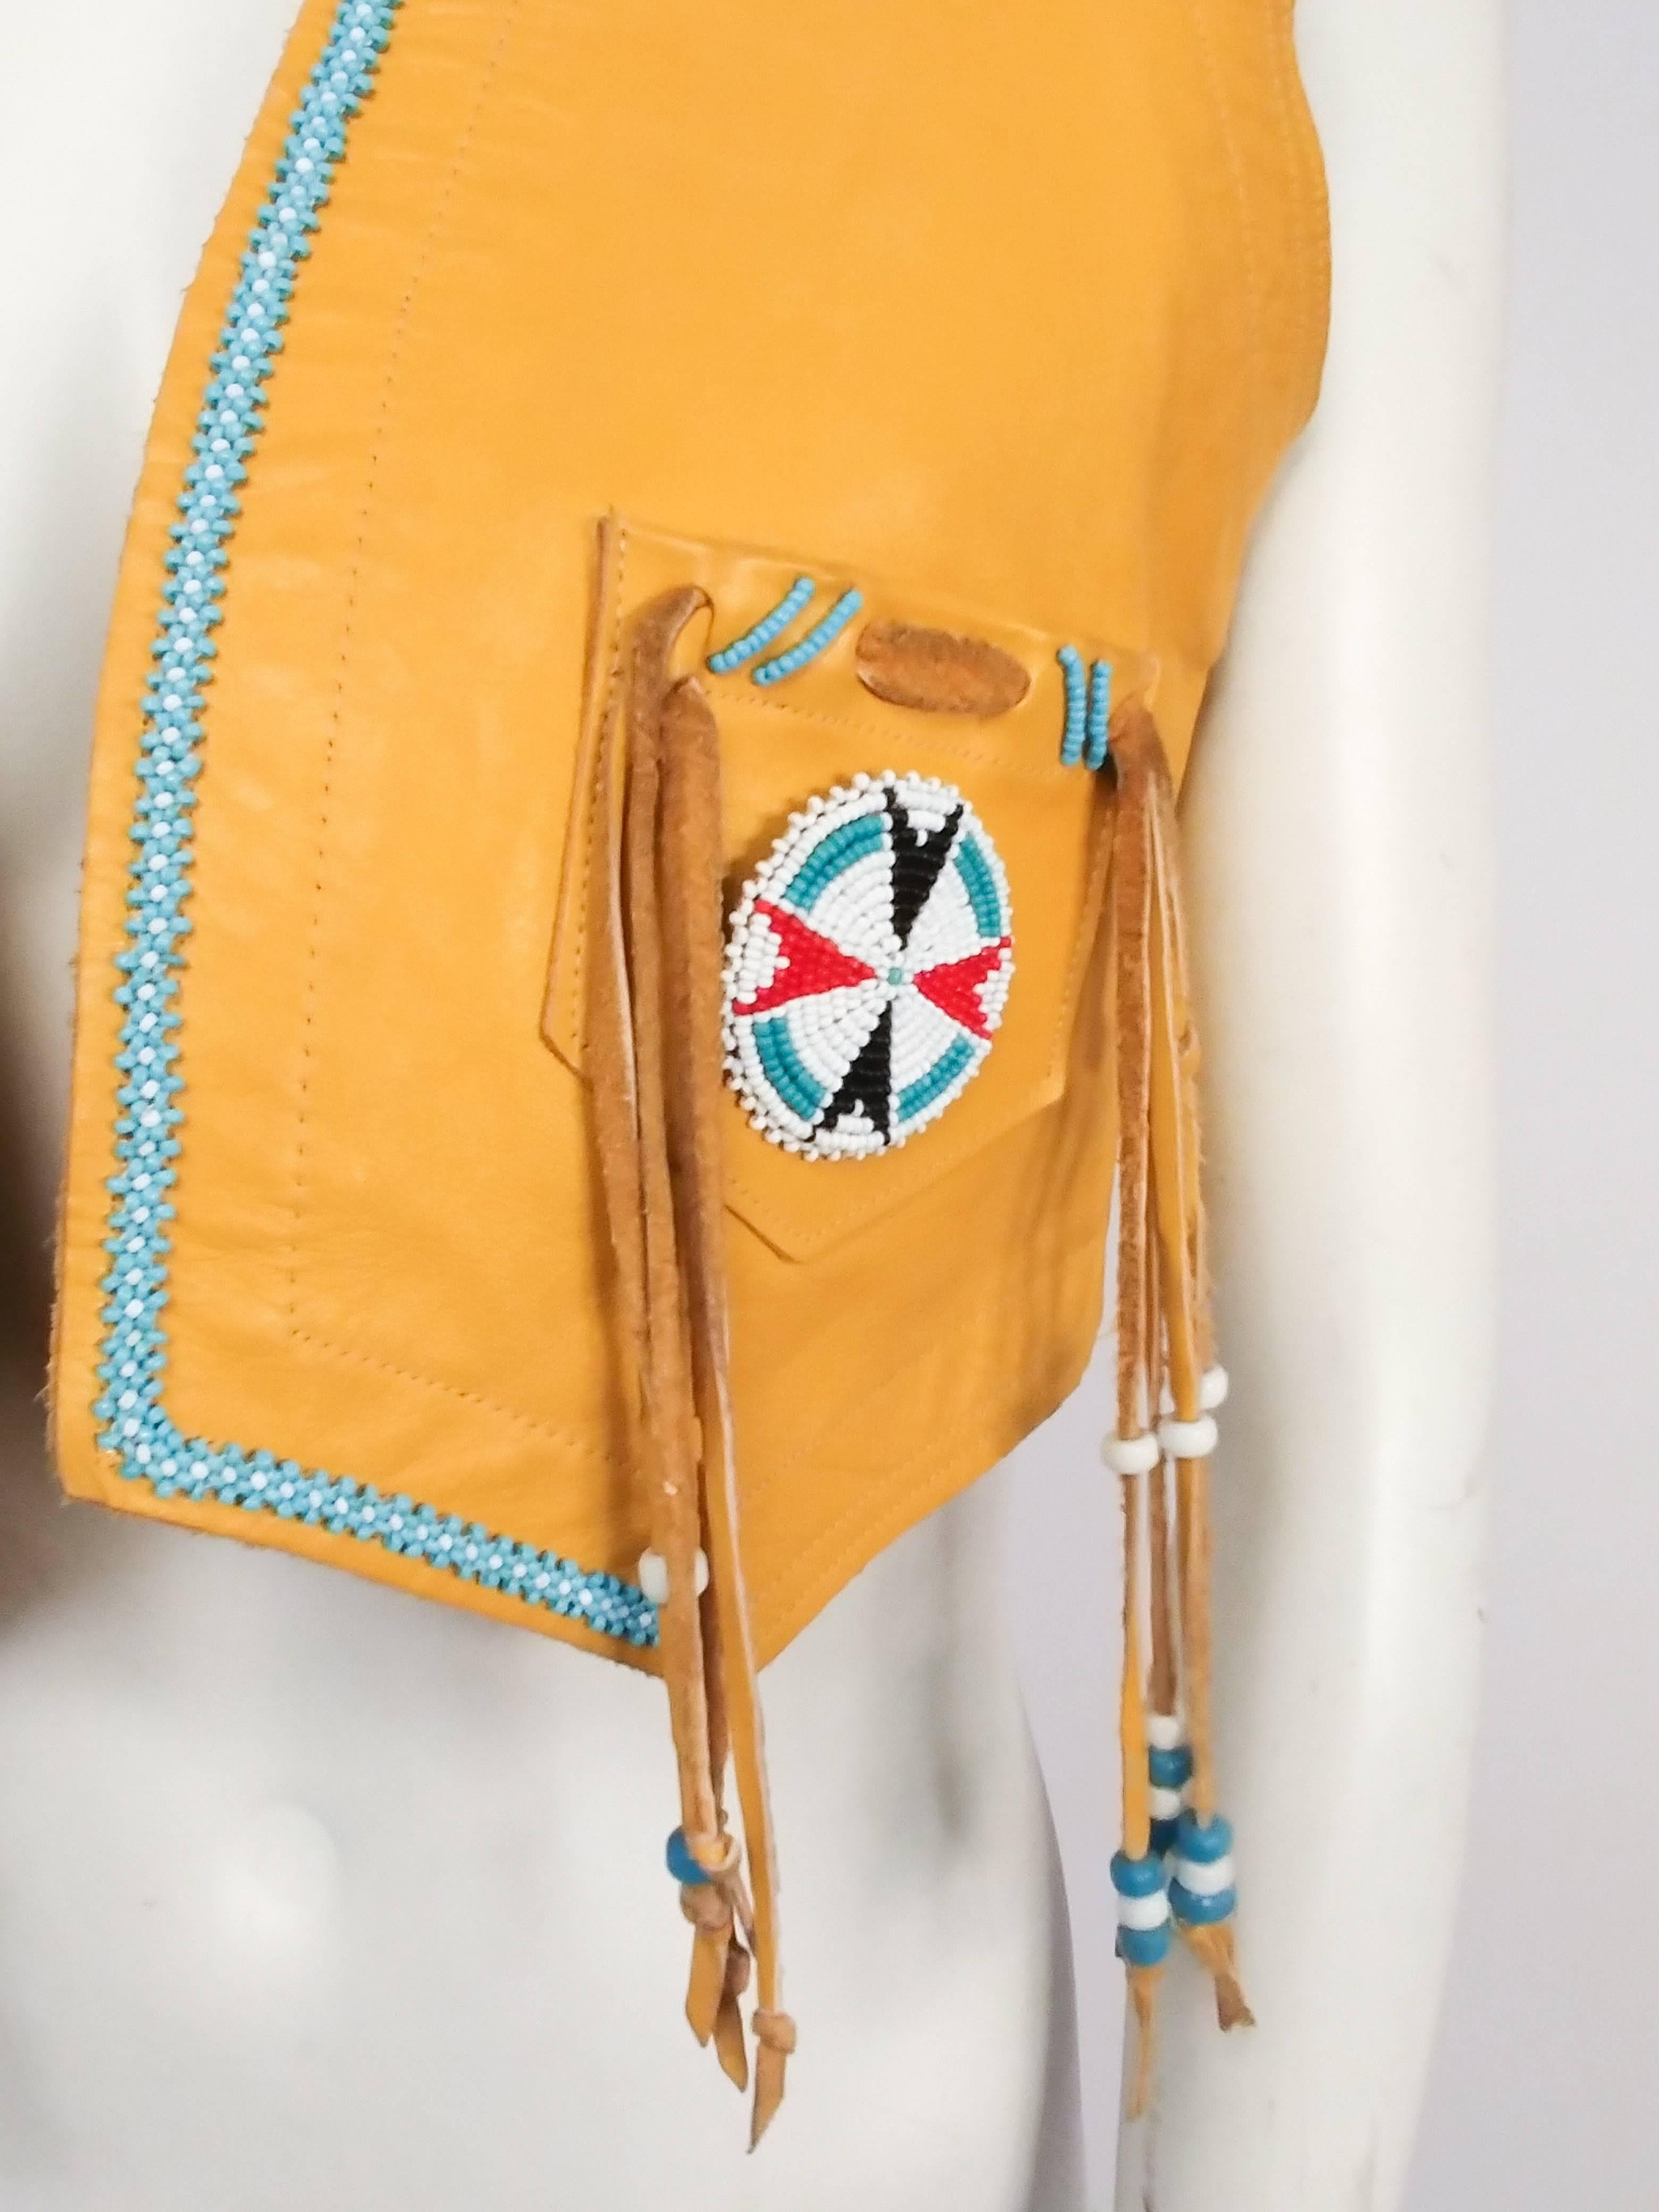 1960s Handmade Hippie Leather Vest w/ Glass Beads. Short cropped leather vest with native-inspired beading & fringe. 